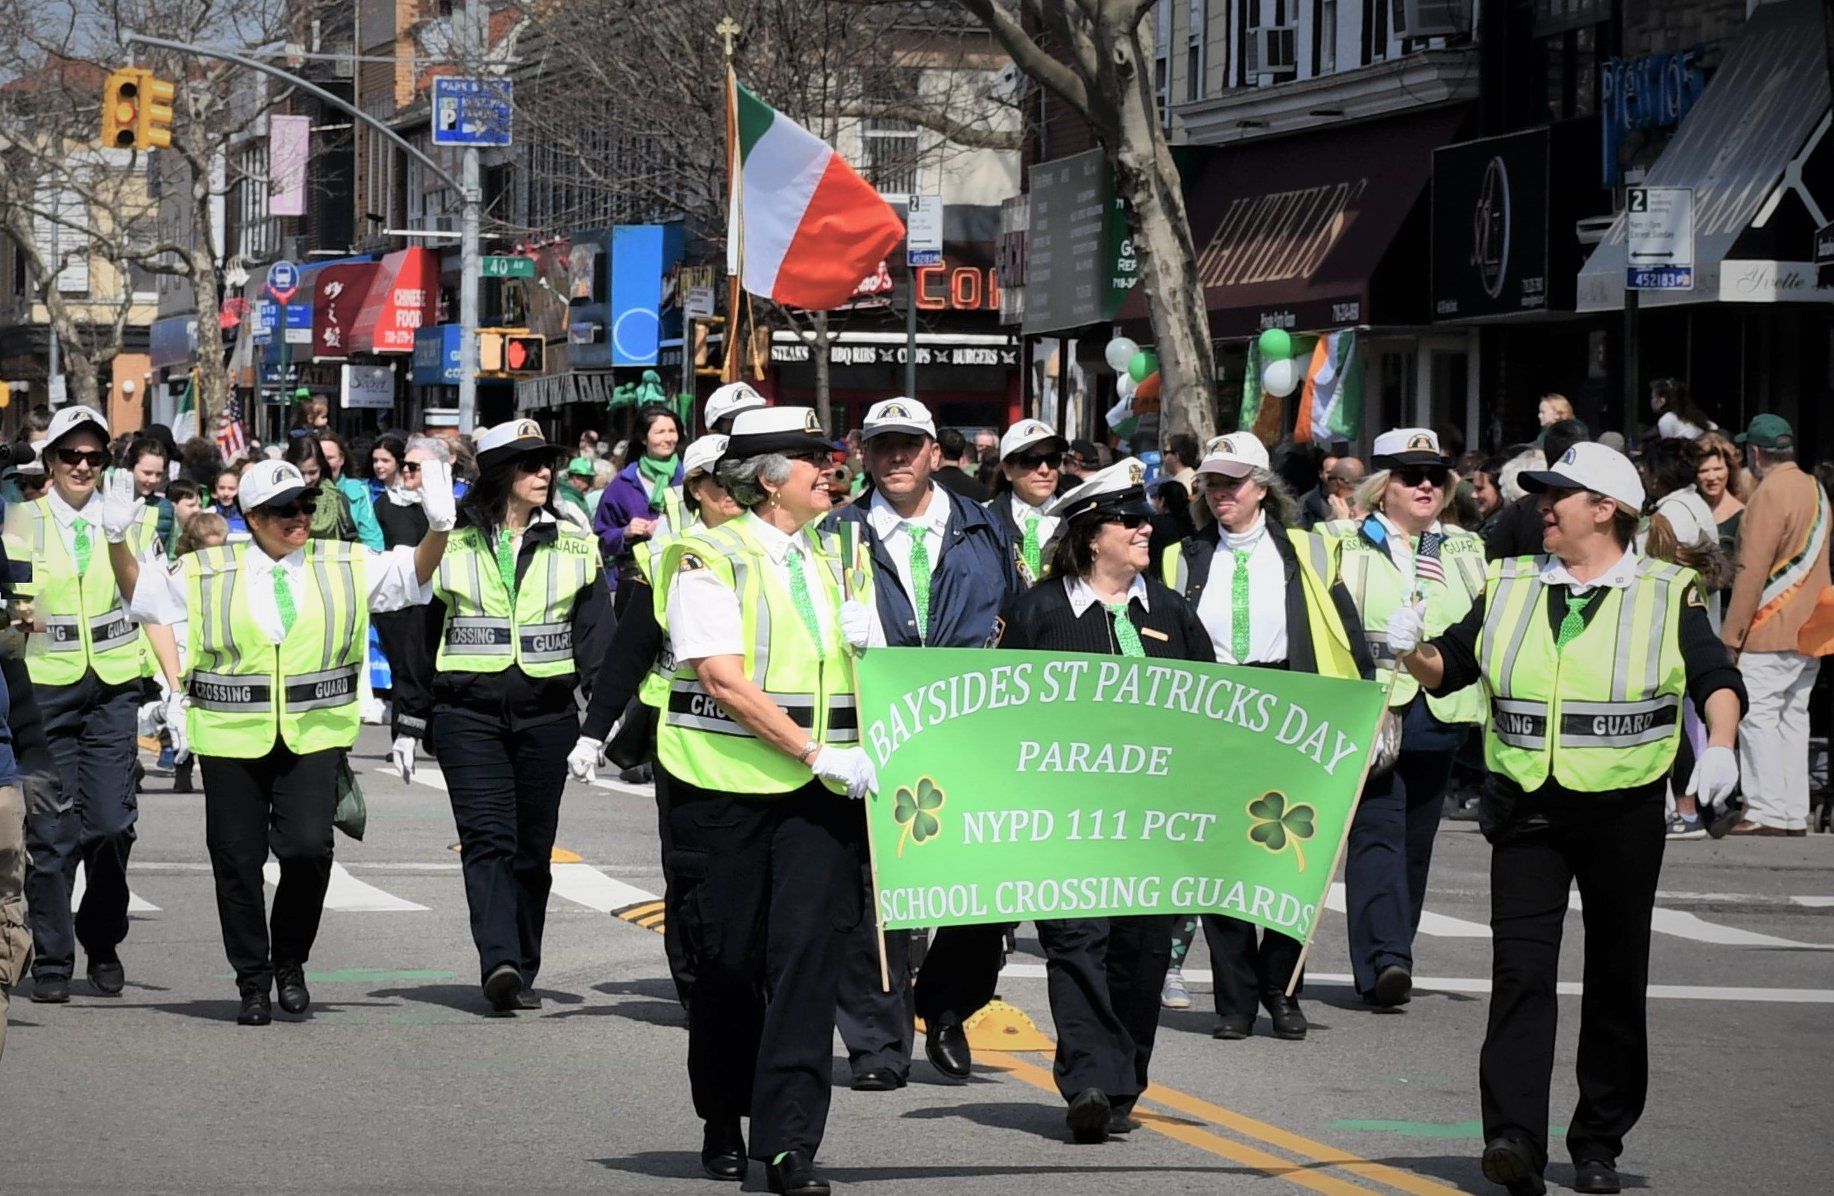 Bayside, Queens to celebrate St. Patrick’s Day in September